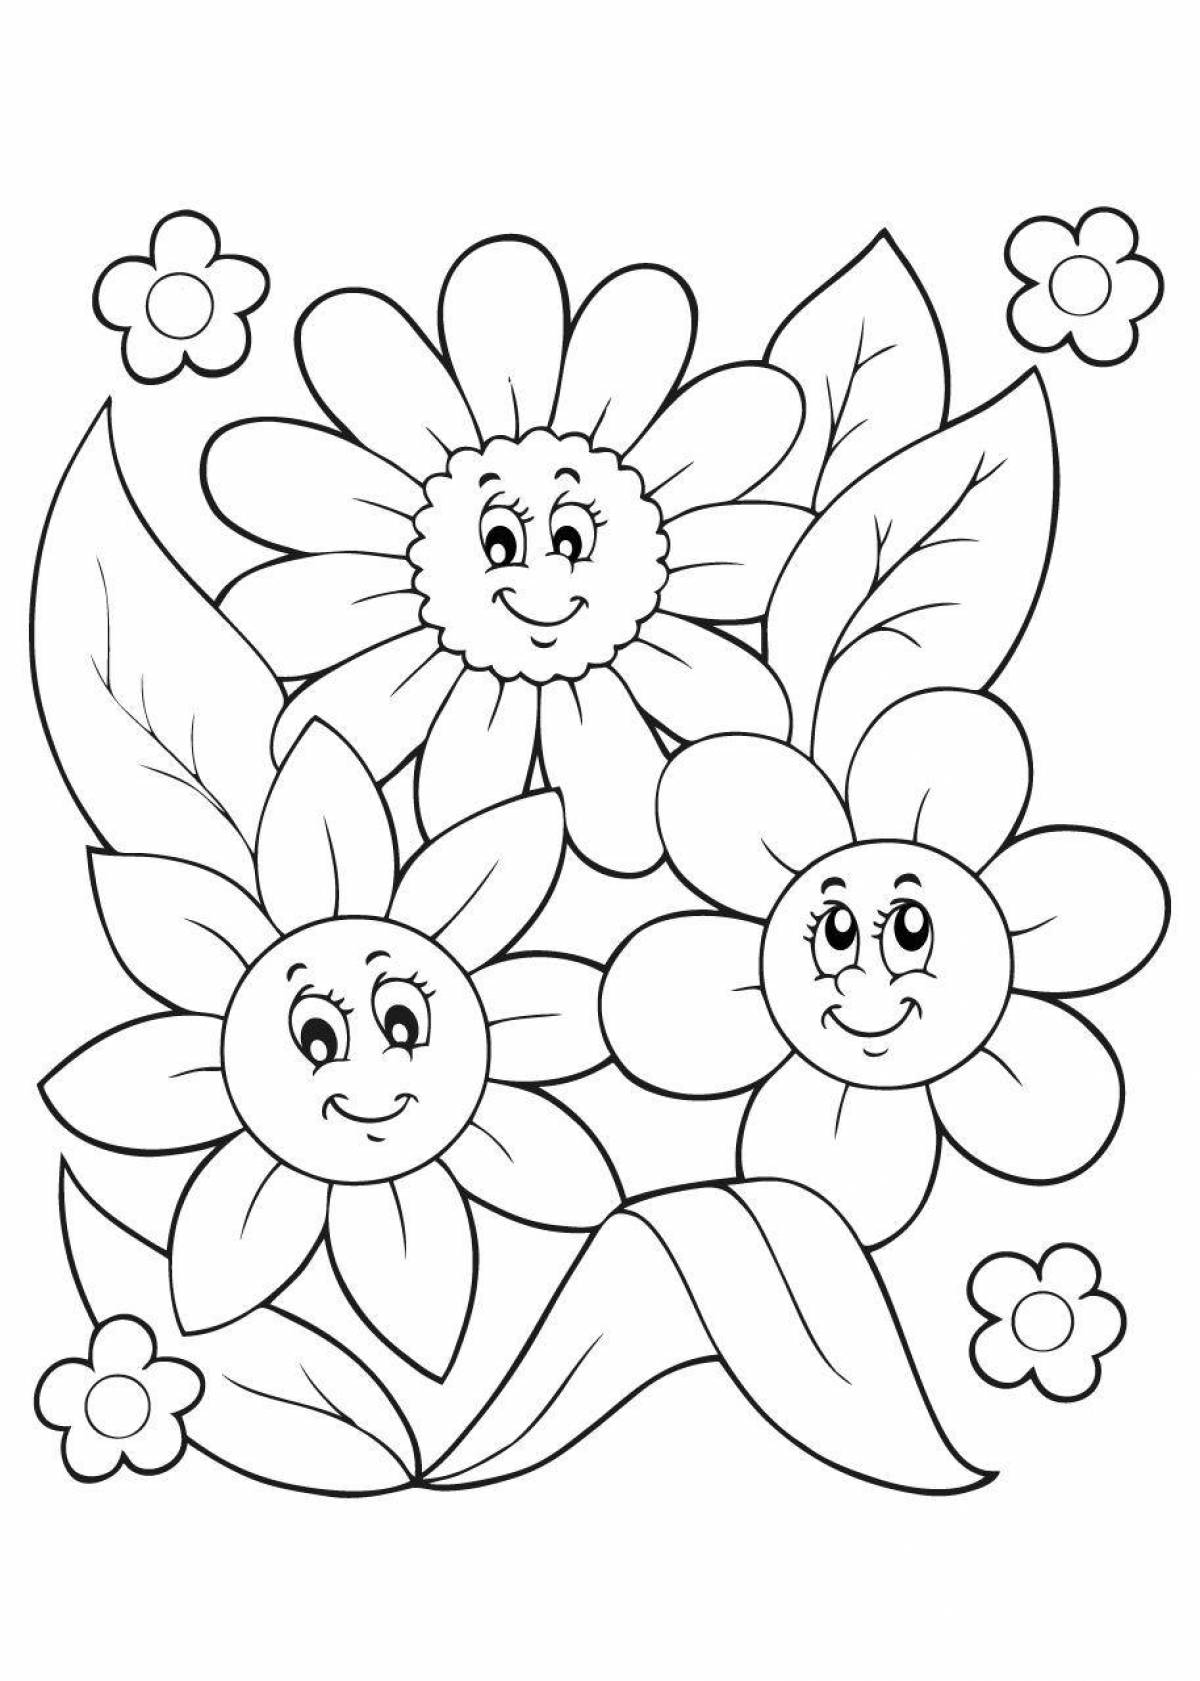 Beautiful flower coloring pages for 4-5 year olds